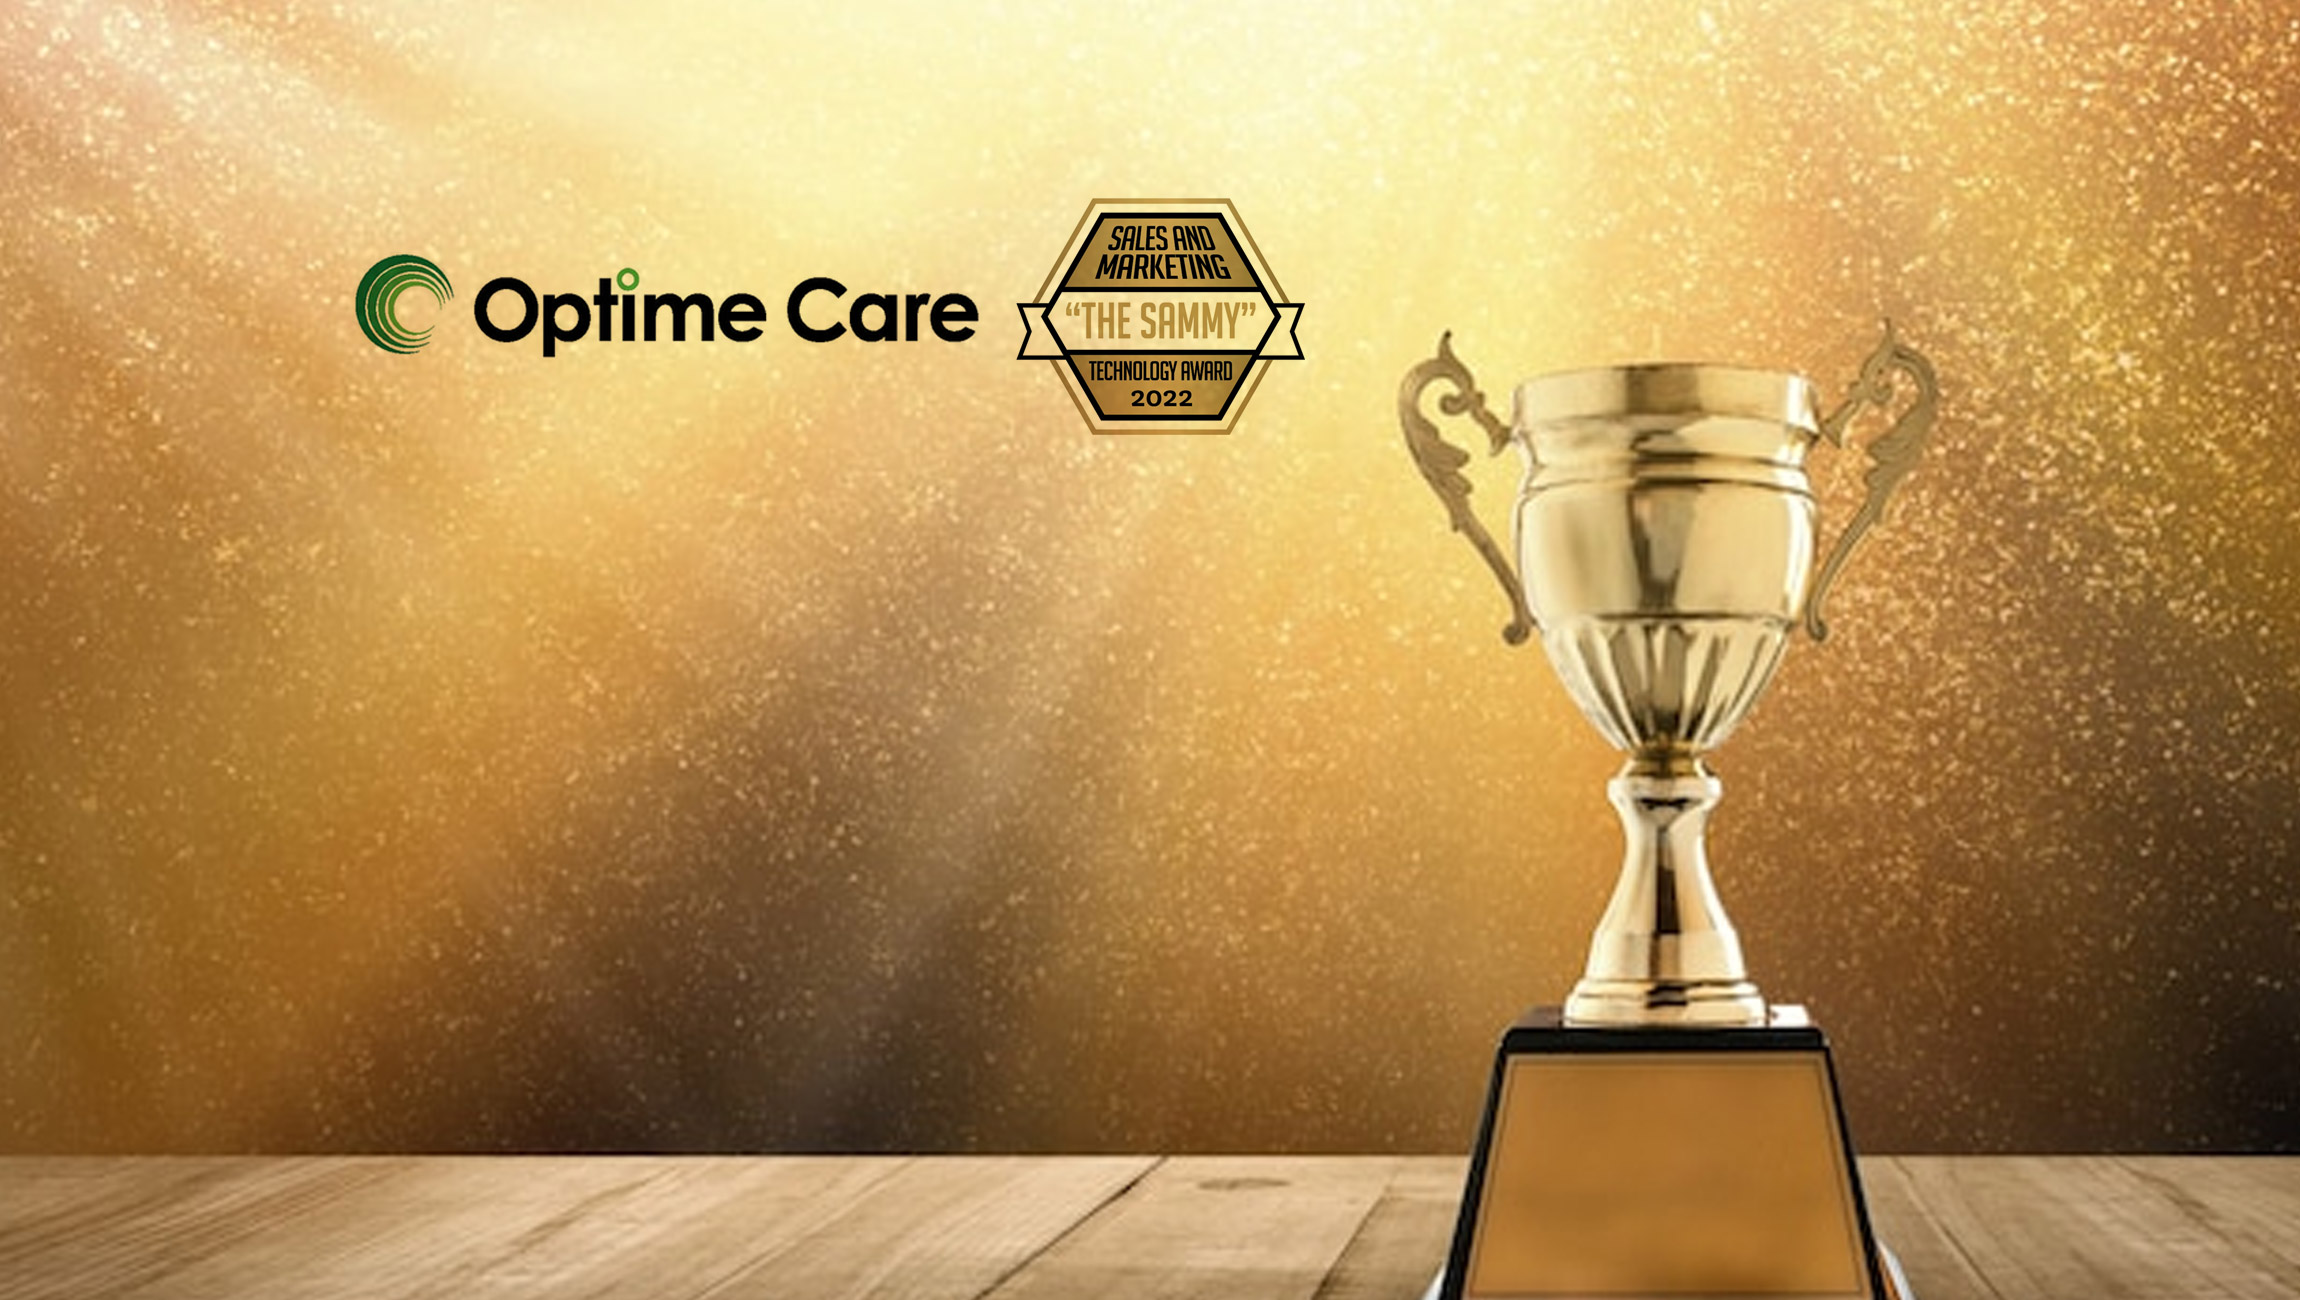 Optime Care Receives 2022 Sales and Marketing Technology Award